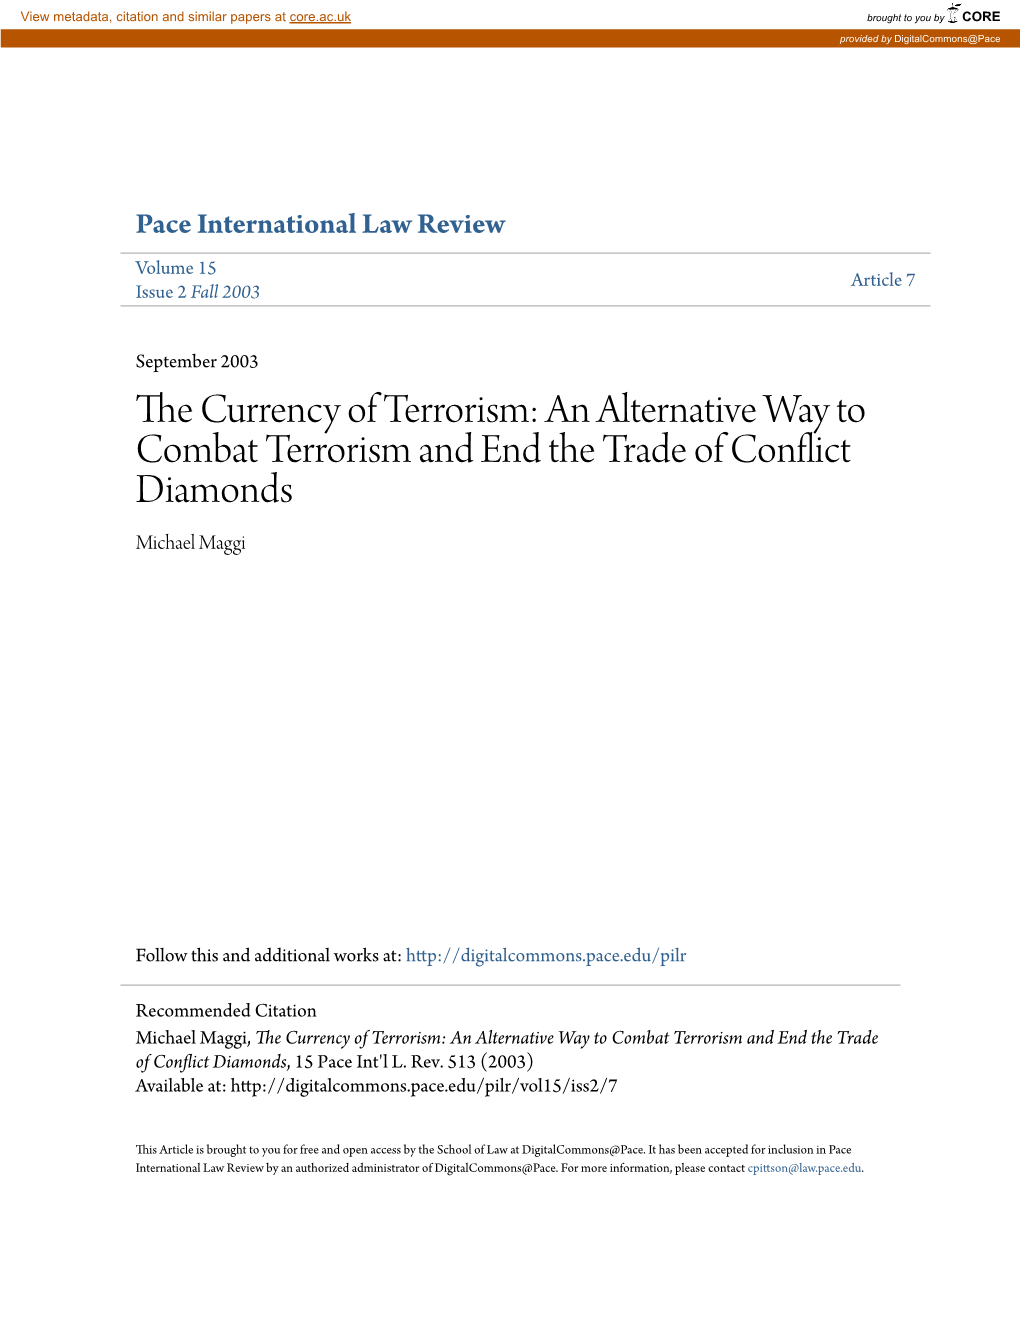 An Alternative Way to Combat Terrorism and End the Trade of Conflict Diamonds Michael Maggi